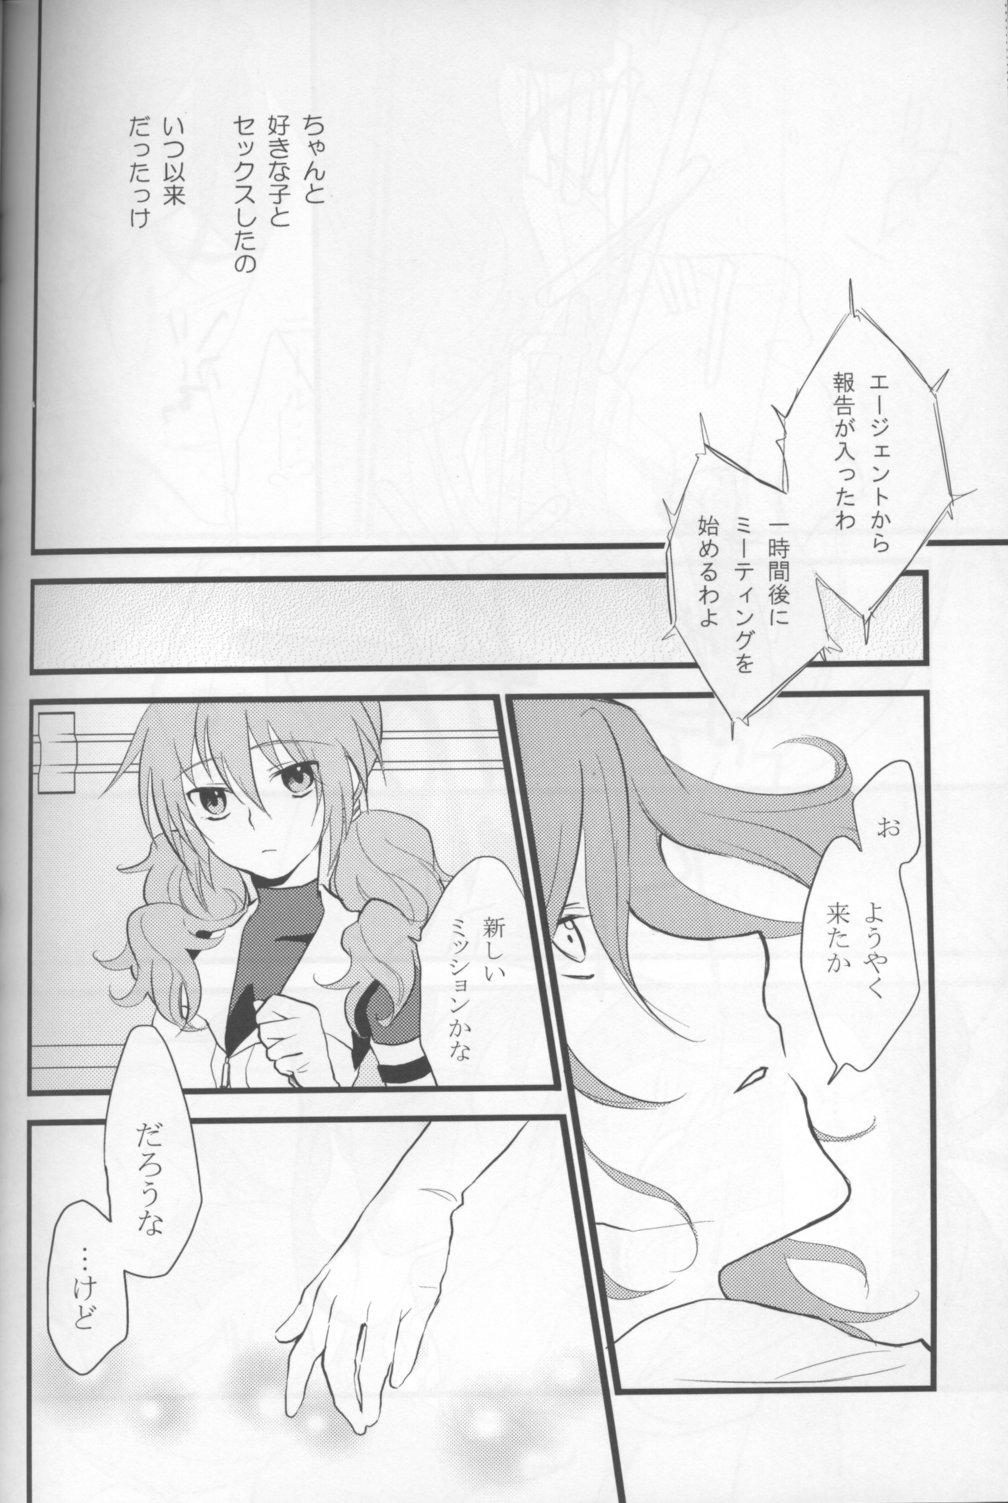 Gaystraight Touch Me - Gundam 00 Doublepenetration - Page 47